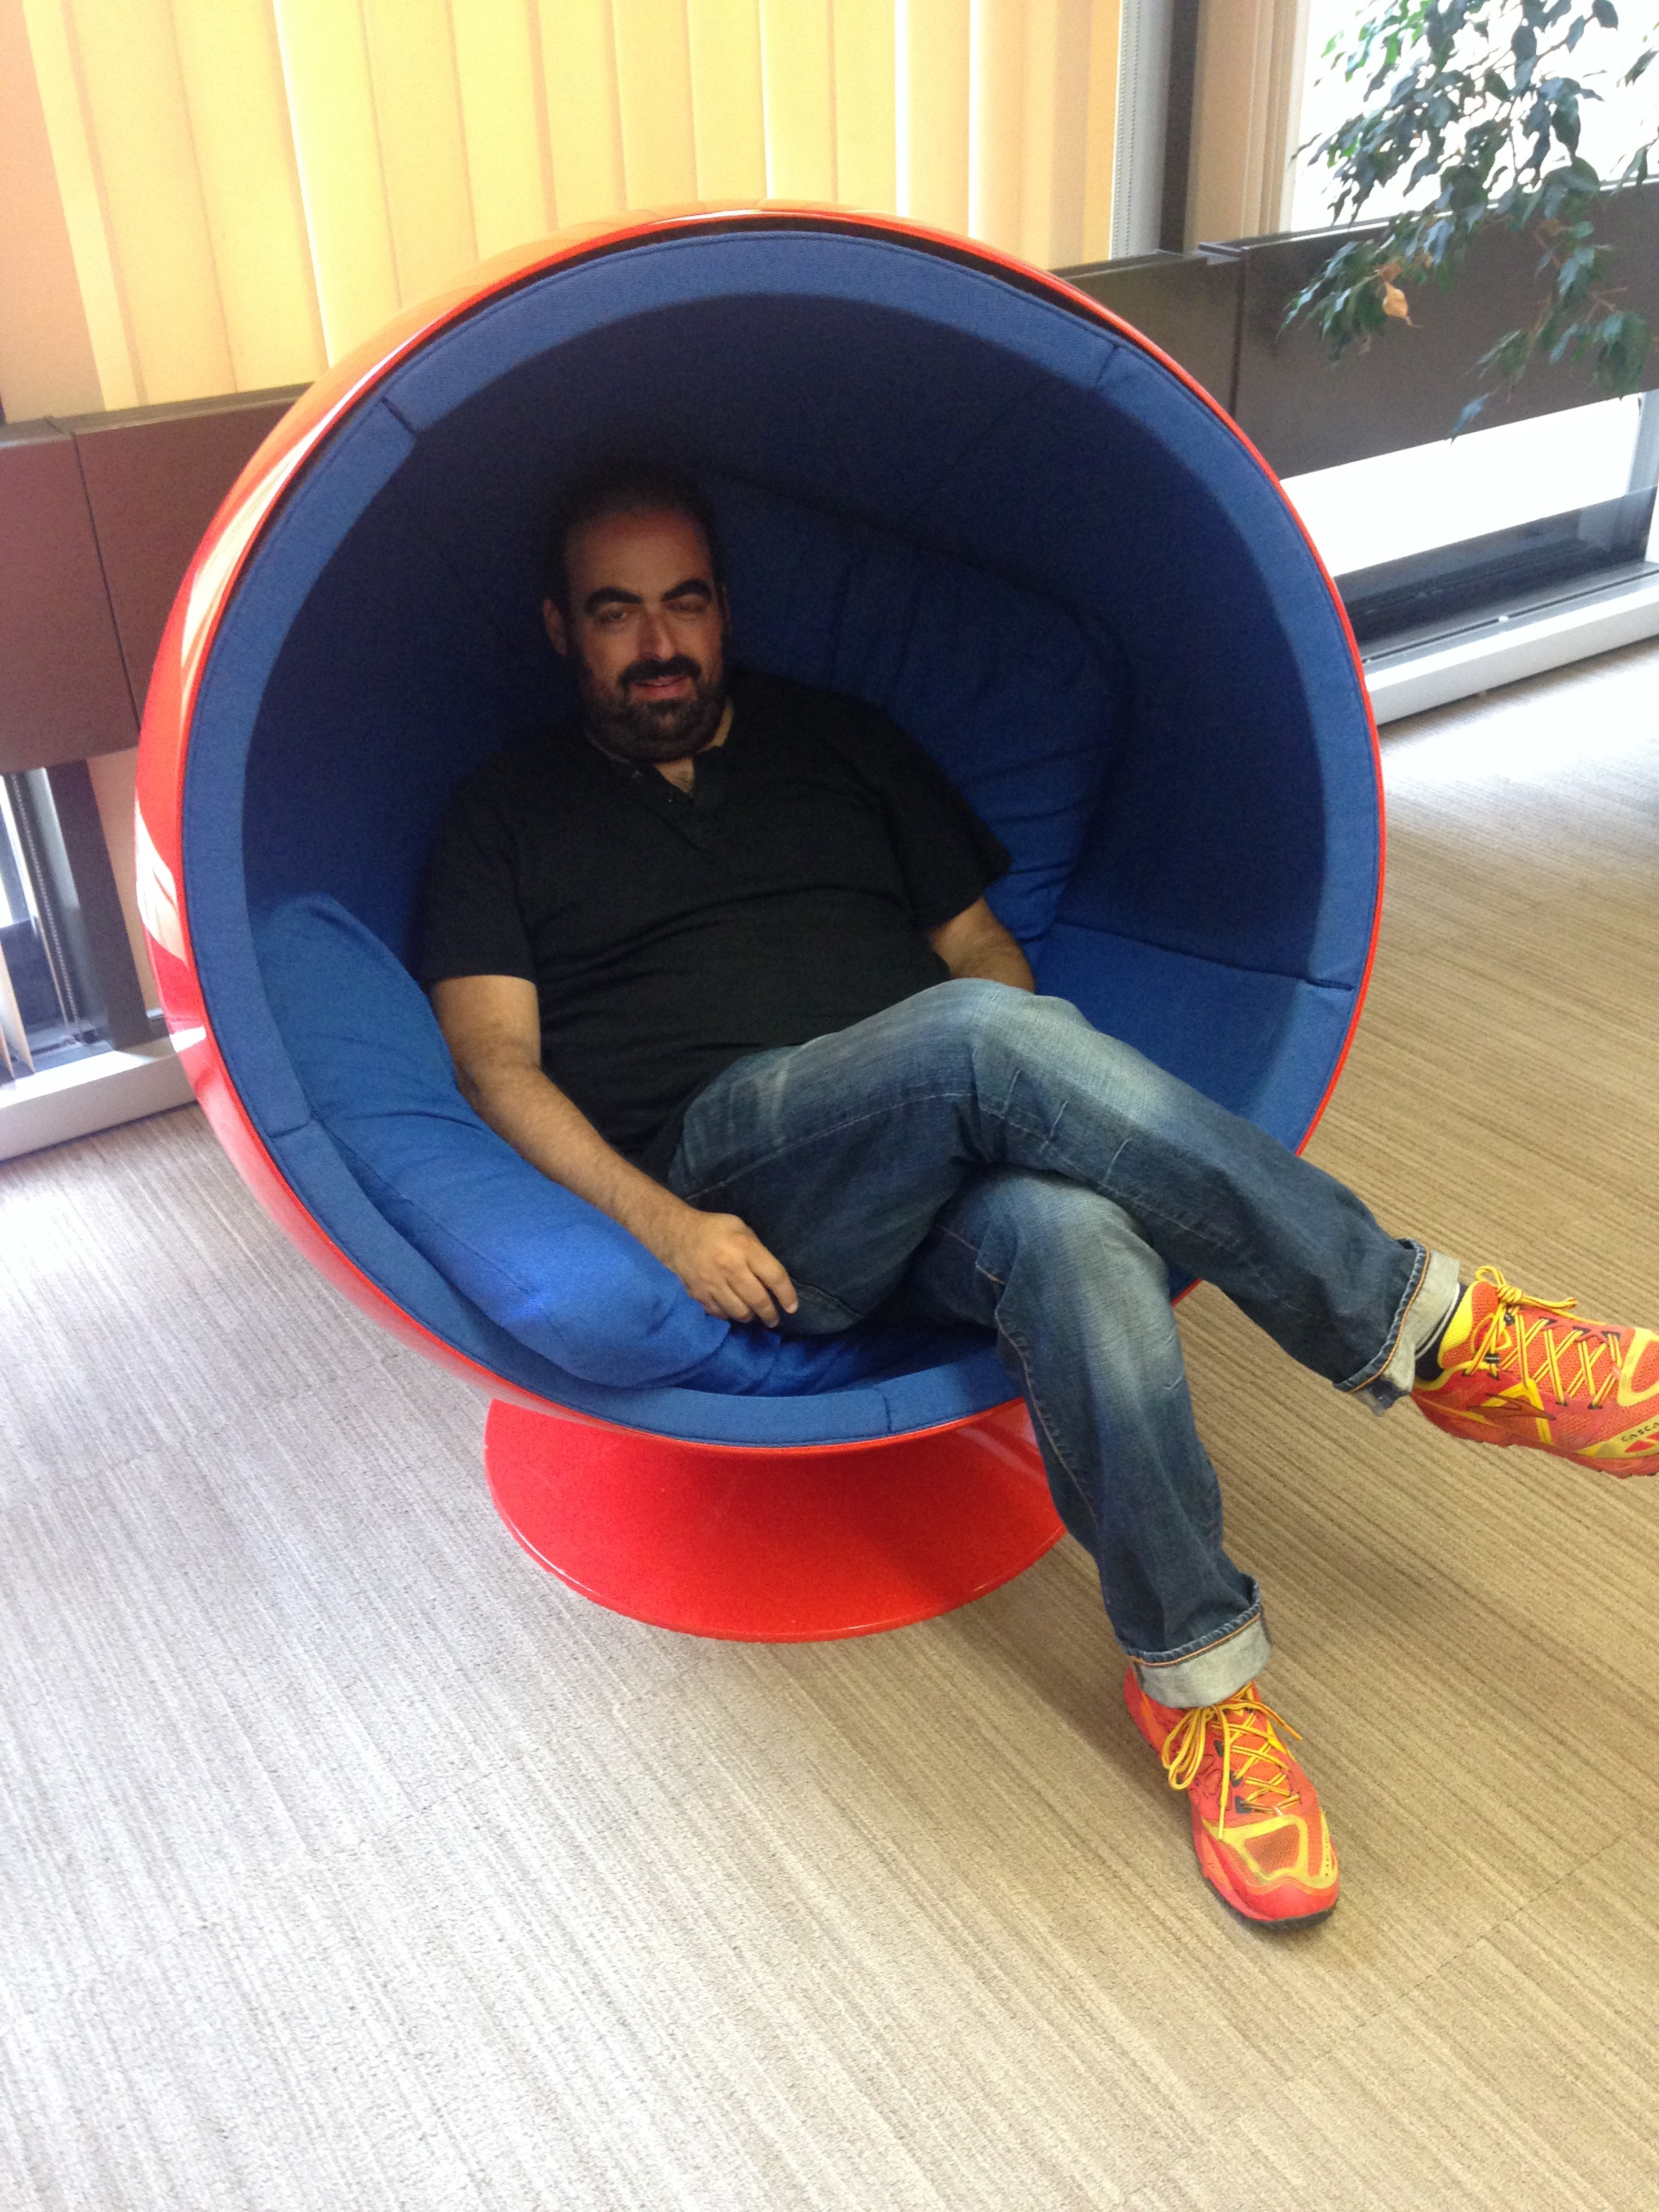 Generations of obies have called these "womb chairs".  It's a "Ball Chair".